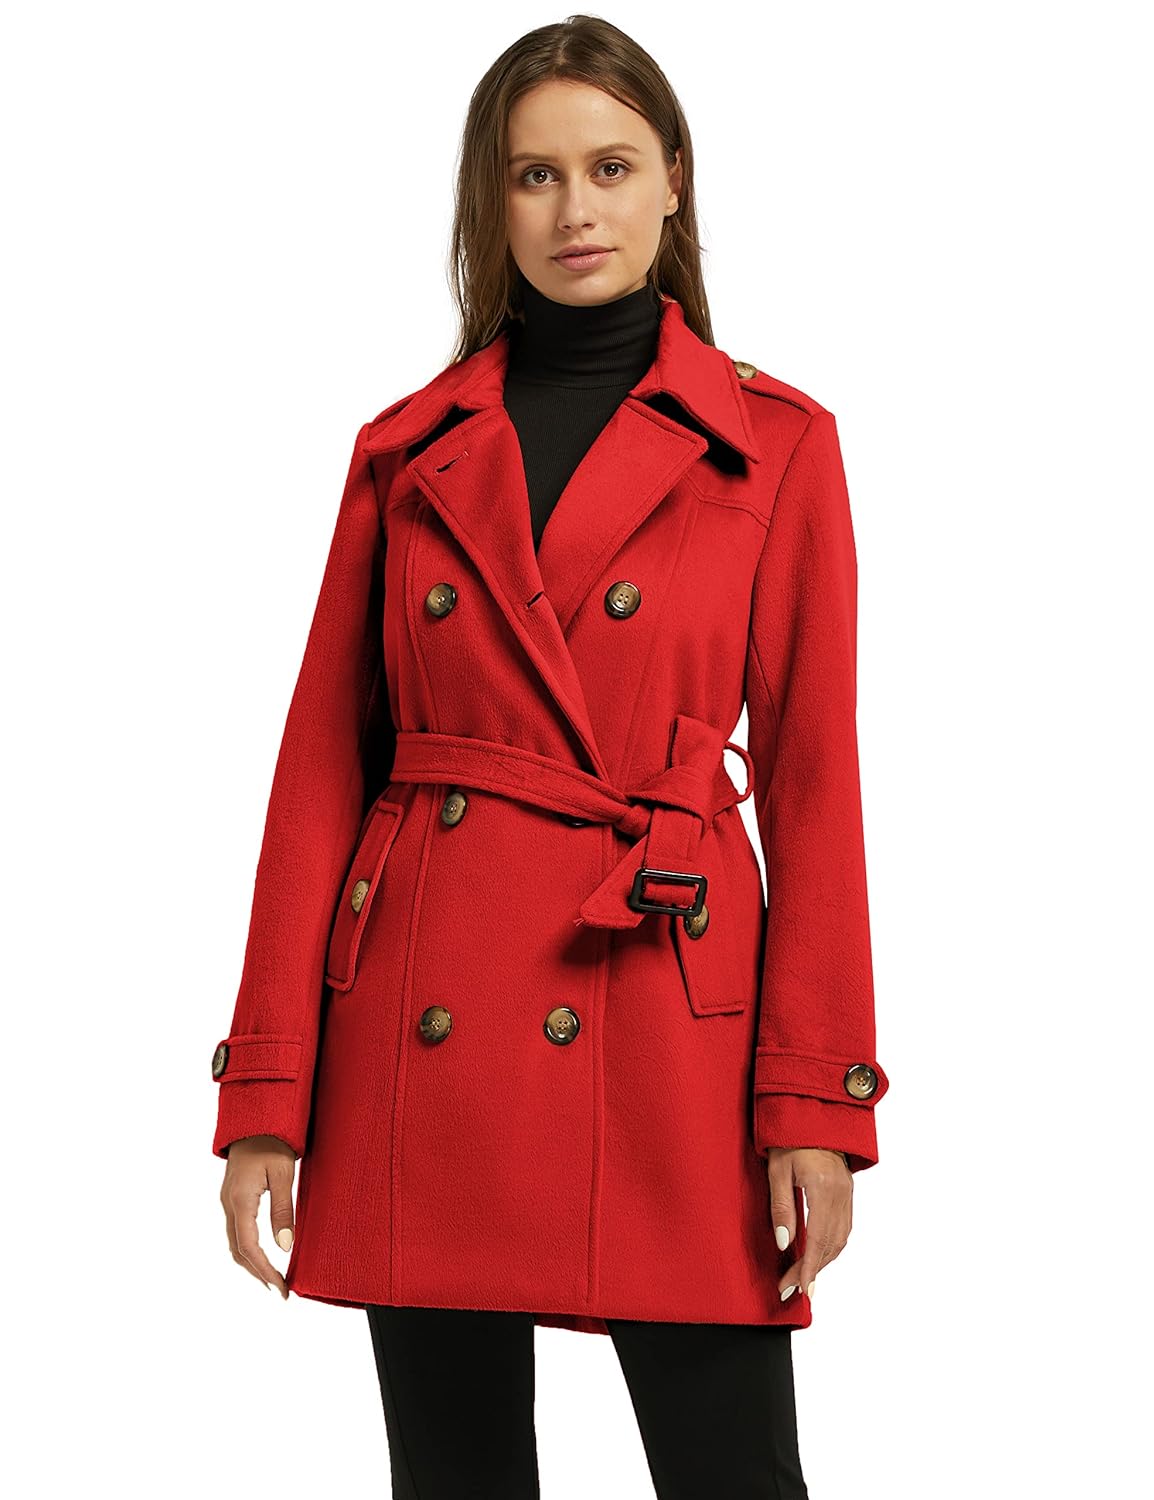 Wantdo Women's Double Breasted Long Trench Coats Pea Coat with Belt Red Small